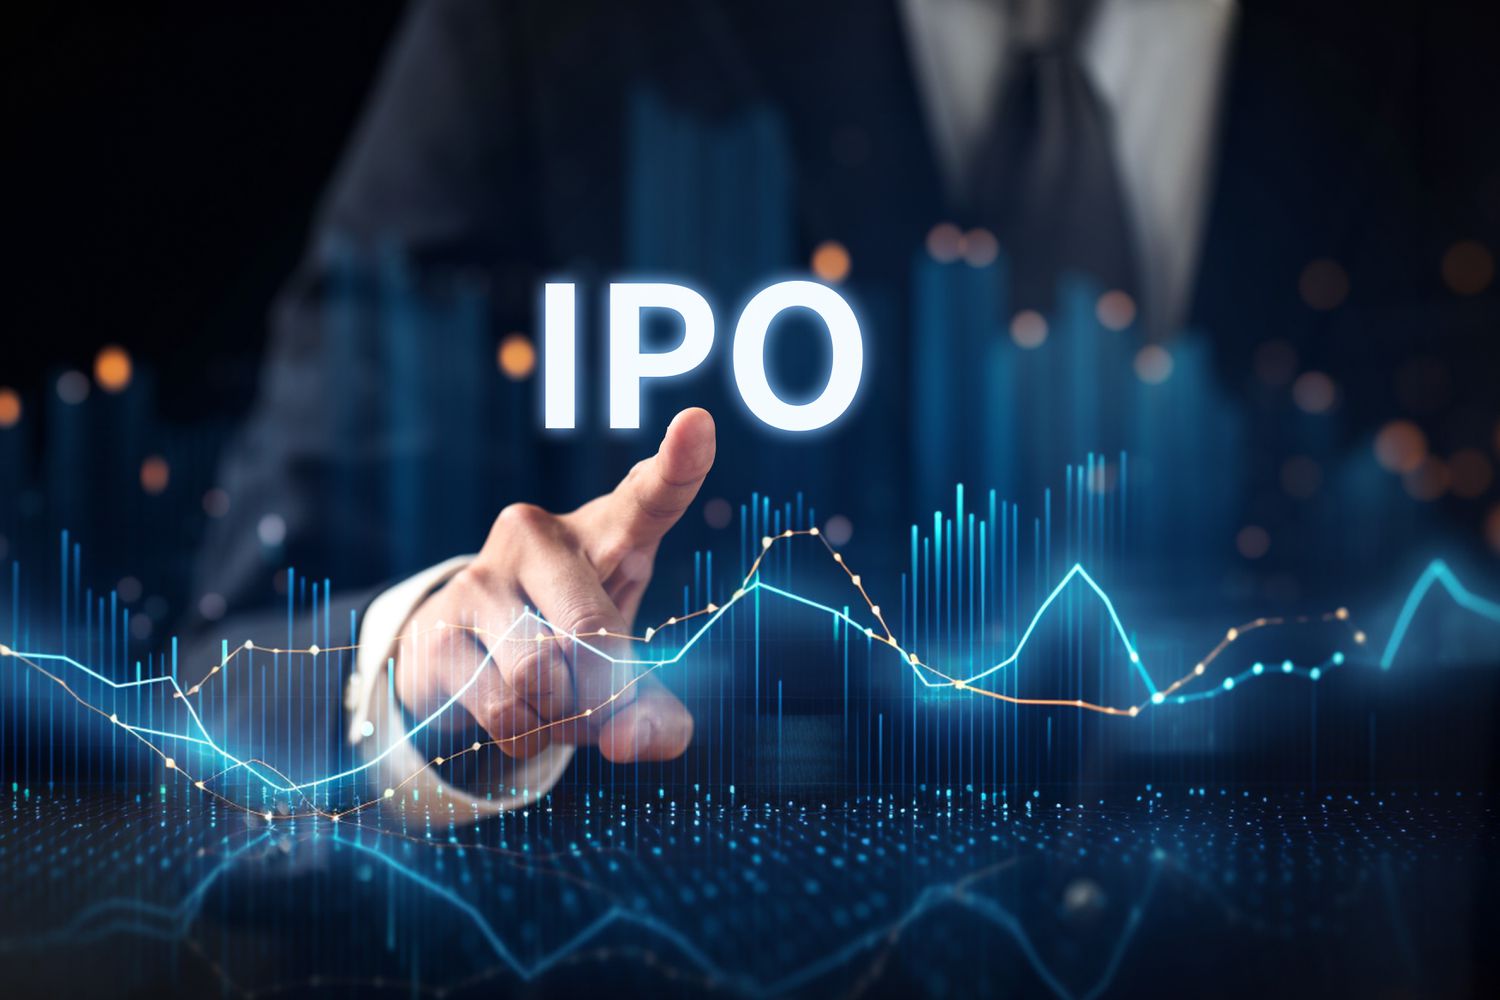 Business person in a suit pointing to IPO text